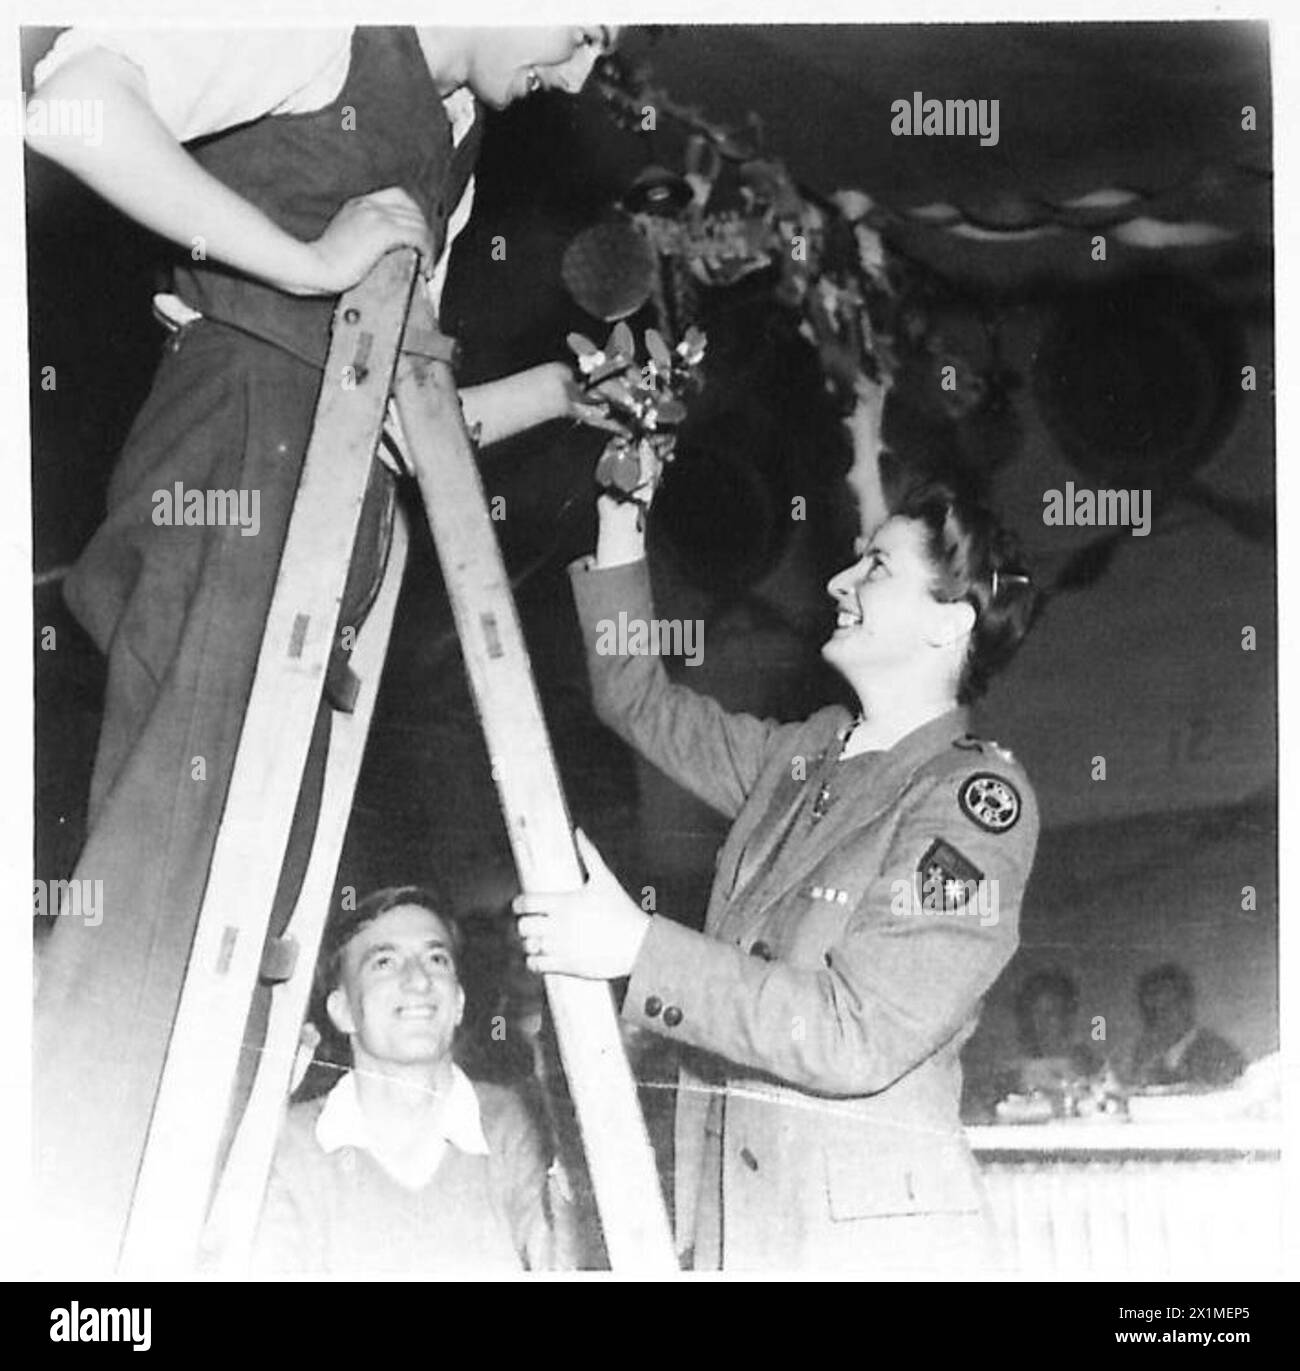 CHRISTMAS DECORATIONS - Mrs. Majorie Oxford of Bristol, British Red Cross (St.Johns) hands a sprig of mistletoe up to Fus. Donald Ryder of Sunnyhill, Preston Brook, Warrington, Lancs, who is on the ladder fixing decorations in the hospital ward, British Army Stock Photo